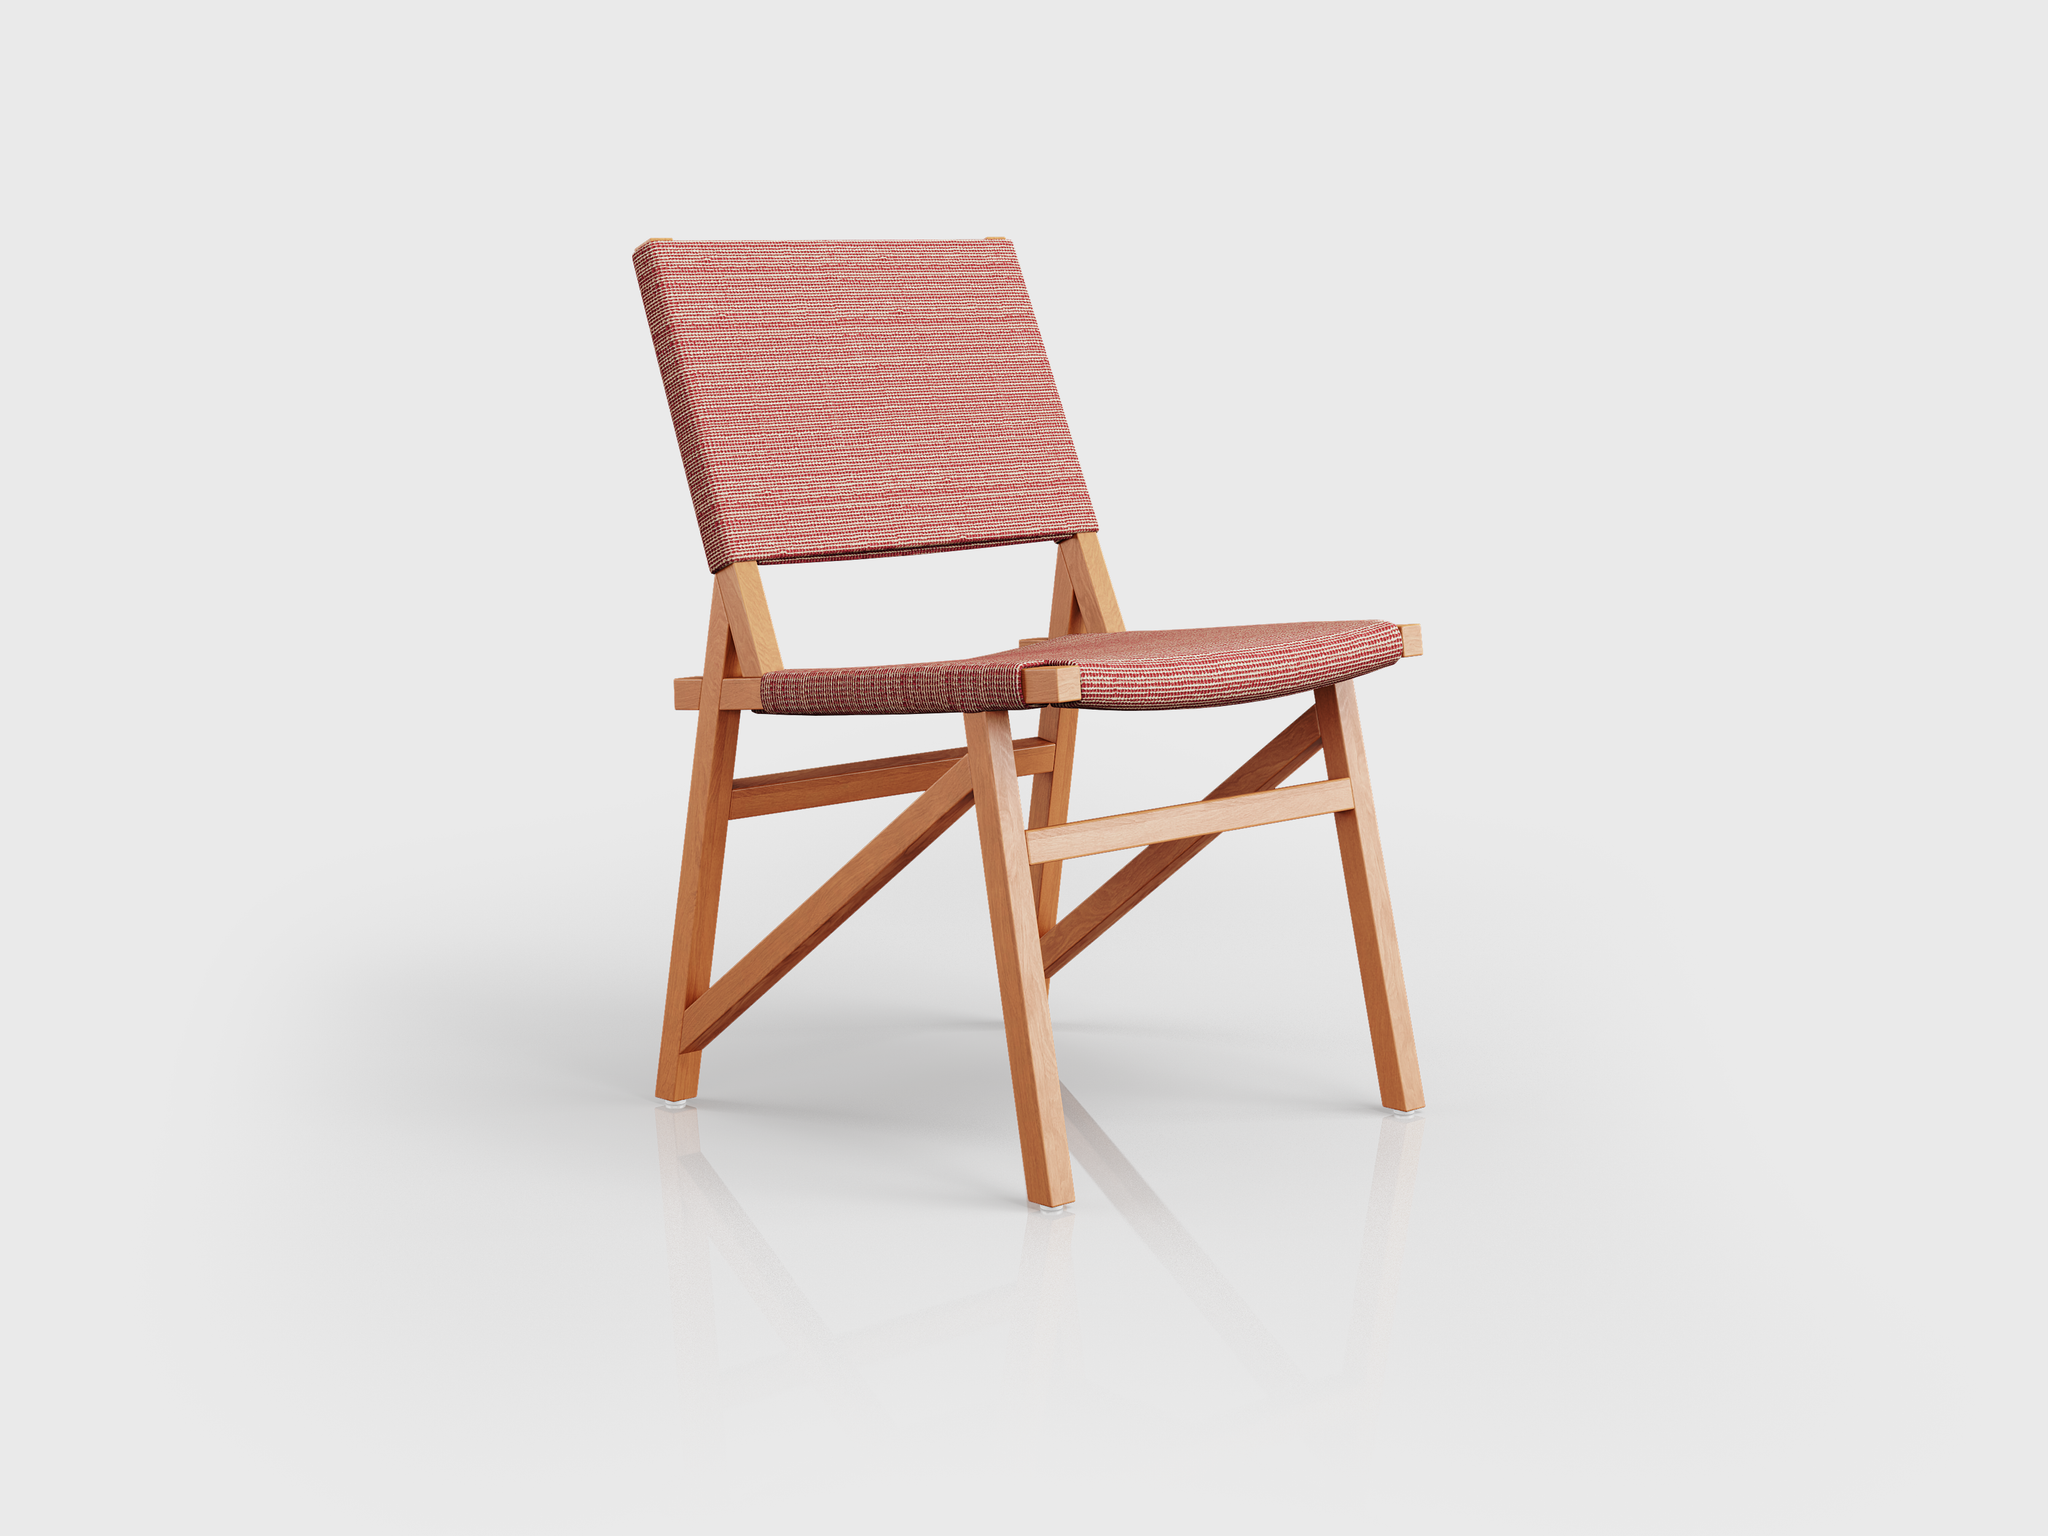 Quechua Chair with wood structure, upholstered seat and back, designed by Luciano Mandelli.